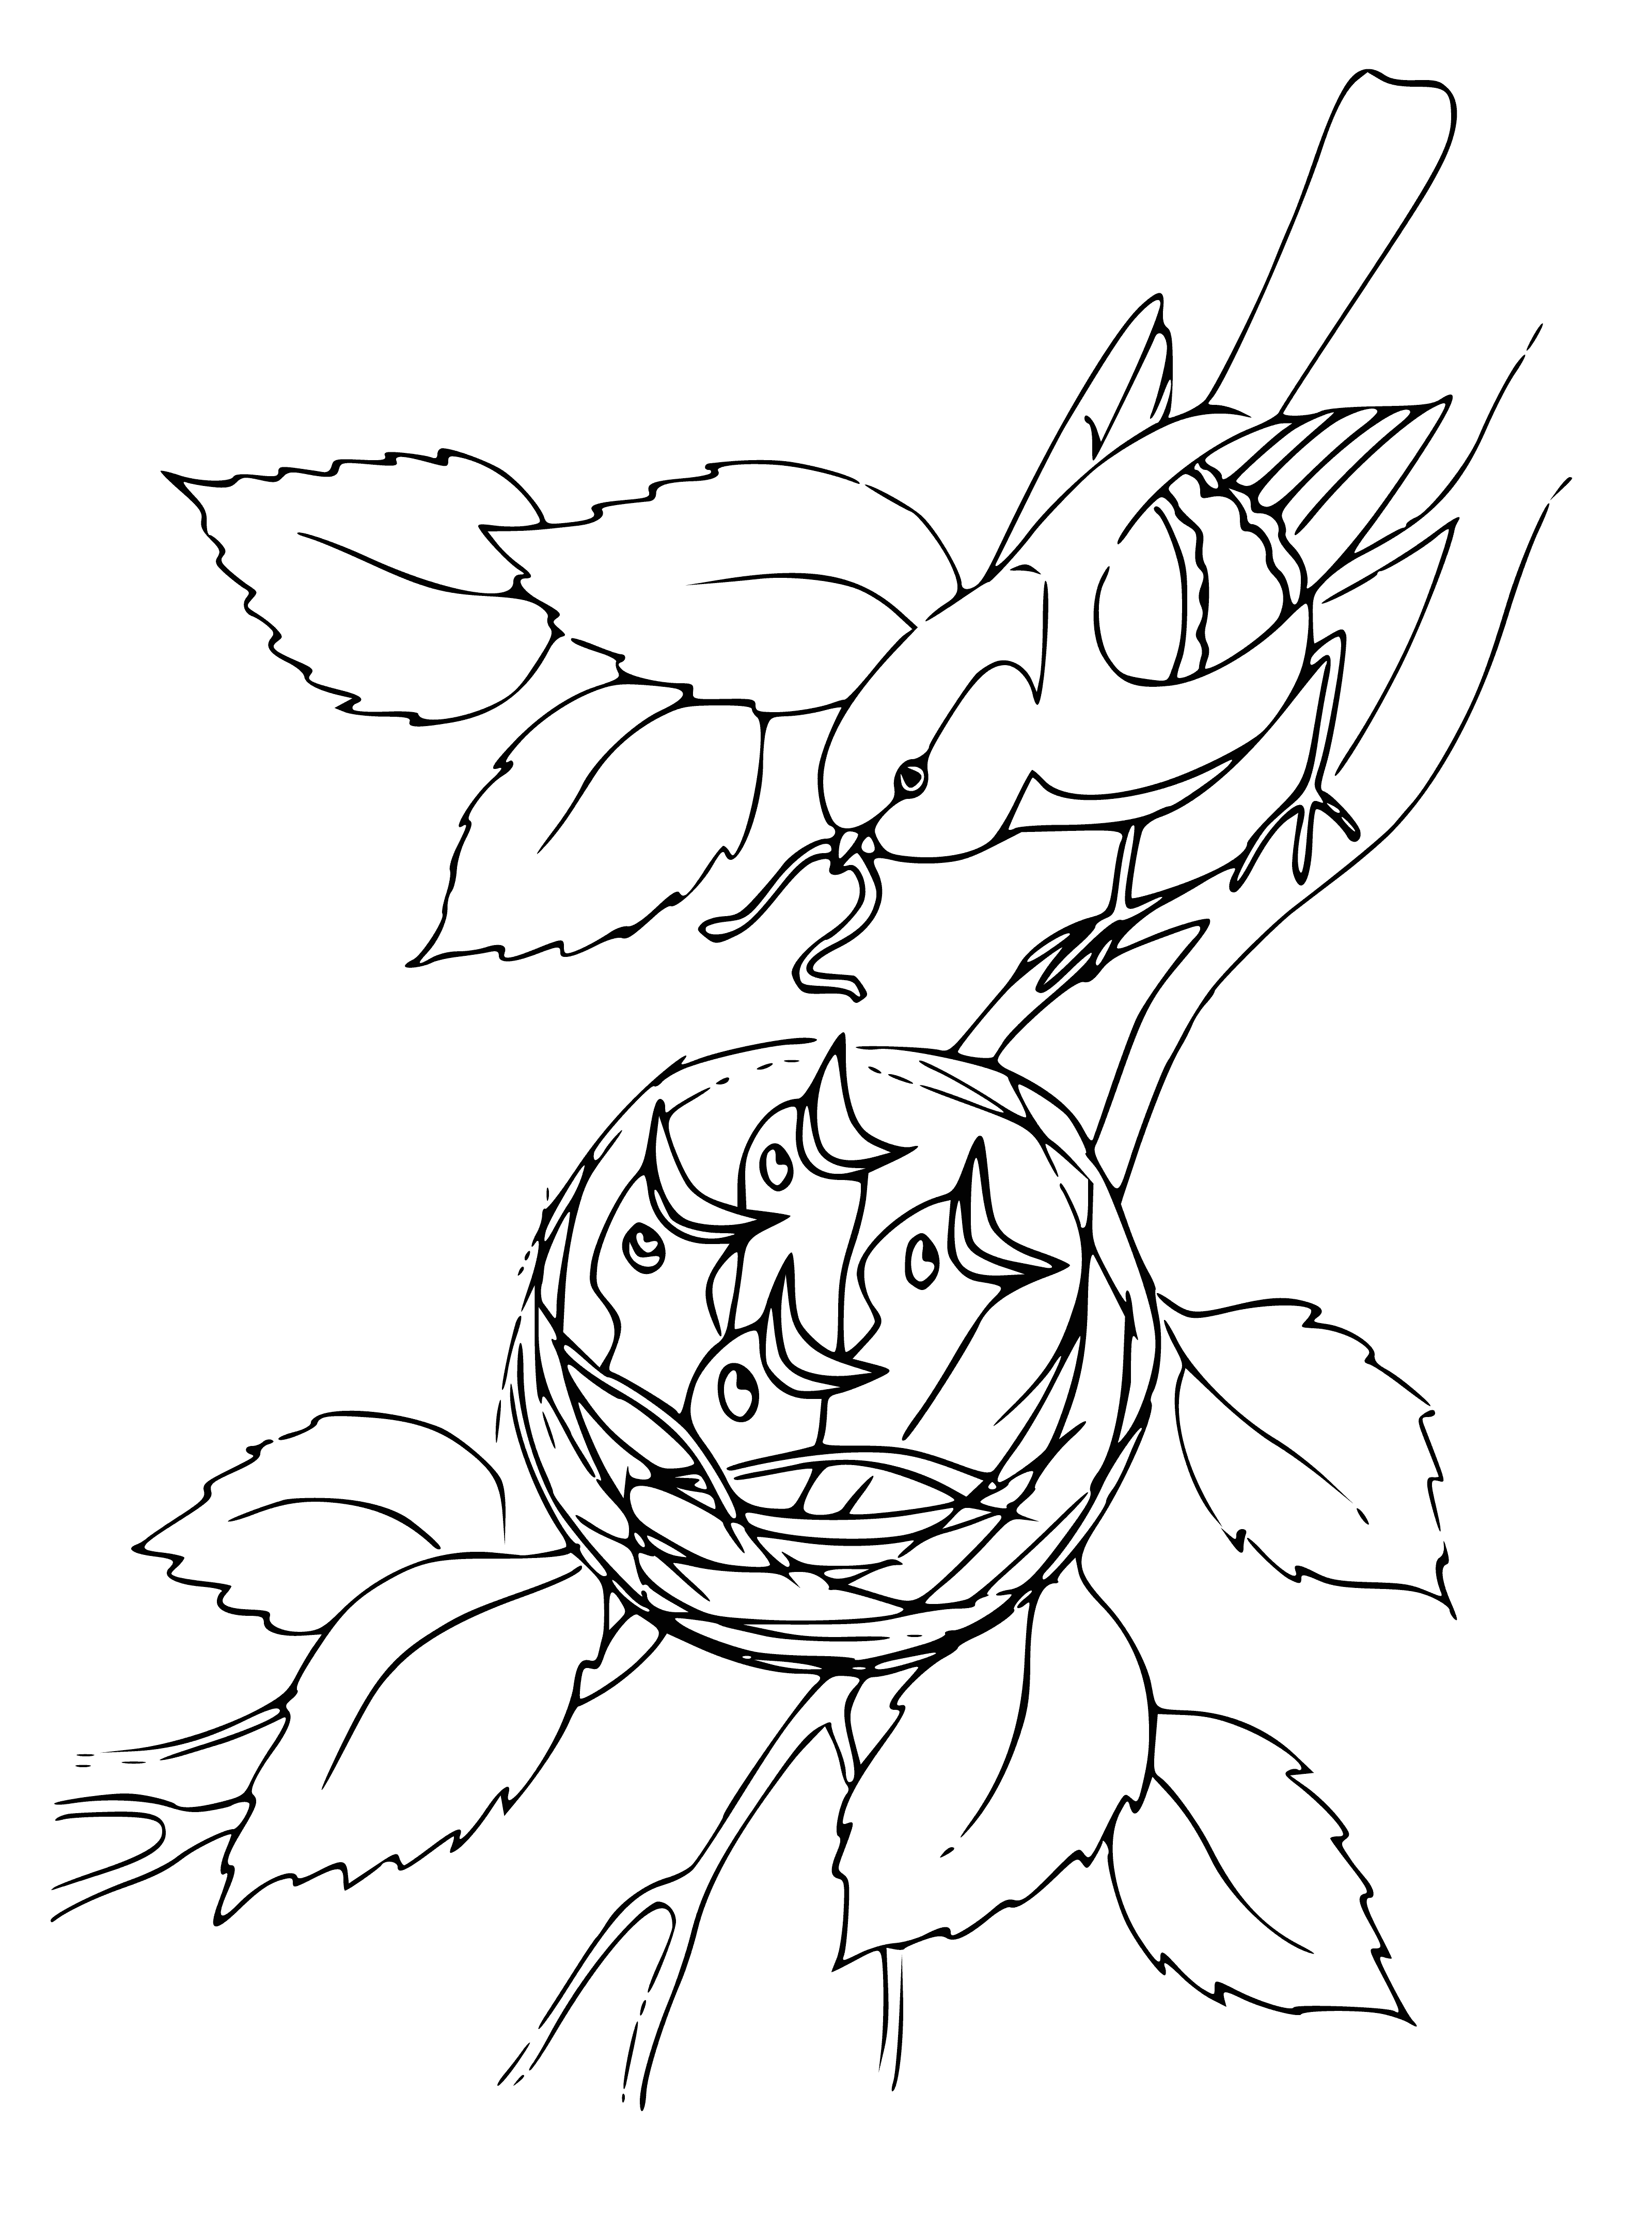 Chicks in the nest coloring page